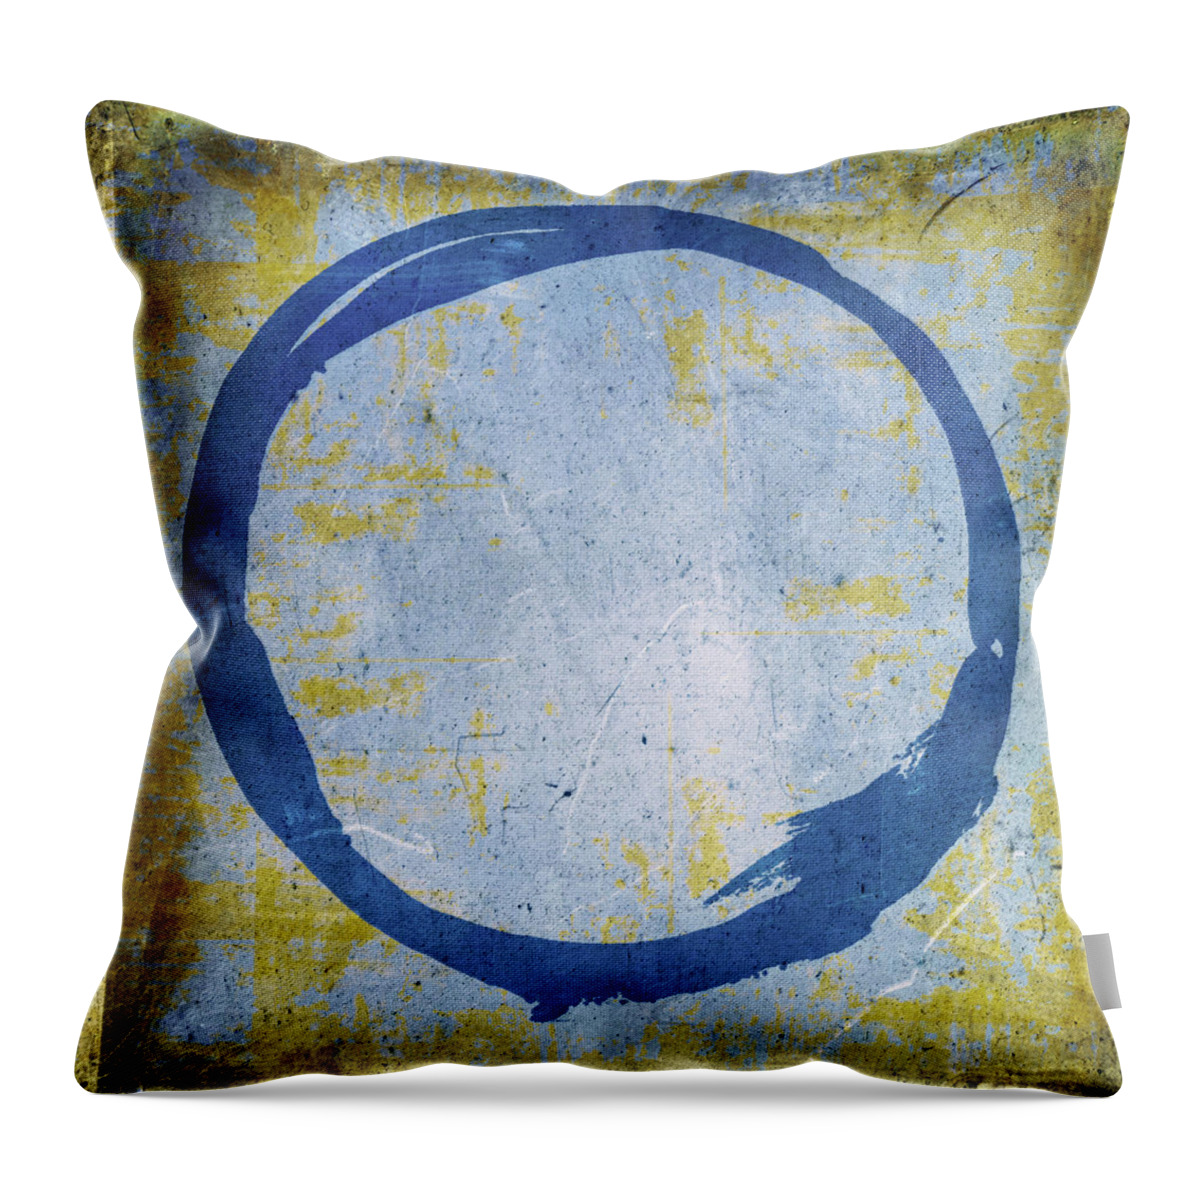 Blue Throw Pillow featuring the painting Enso No. 109 Blue on Blue by Julie Niemela